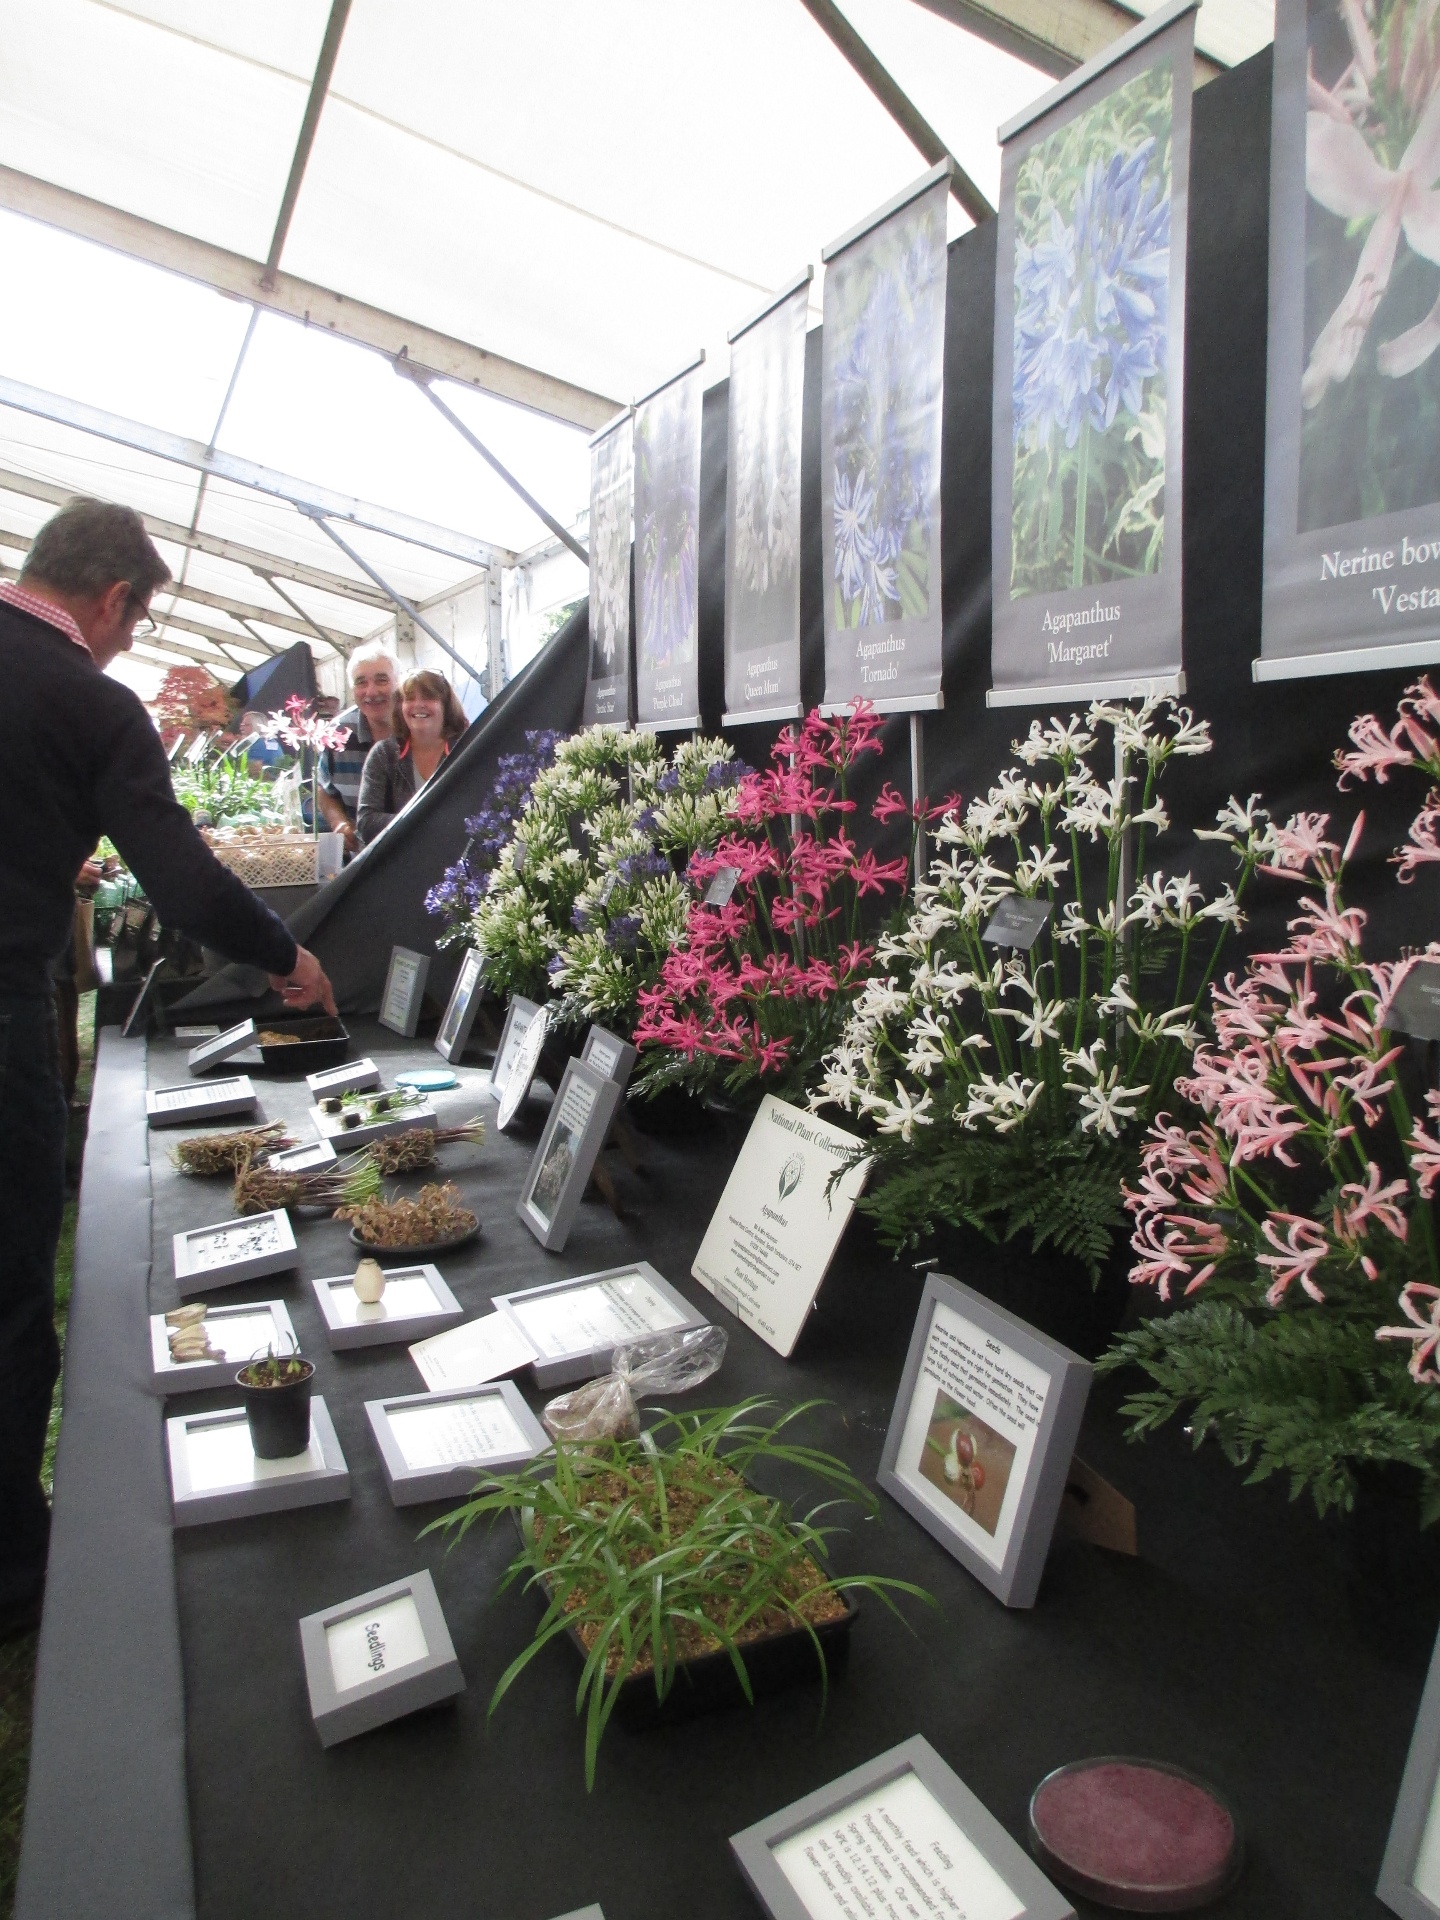 Steve's beautiful display of Nerines and Agapanthus, with examples of different ways of their propagation.